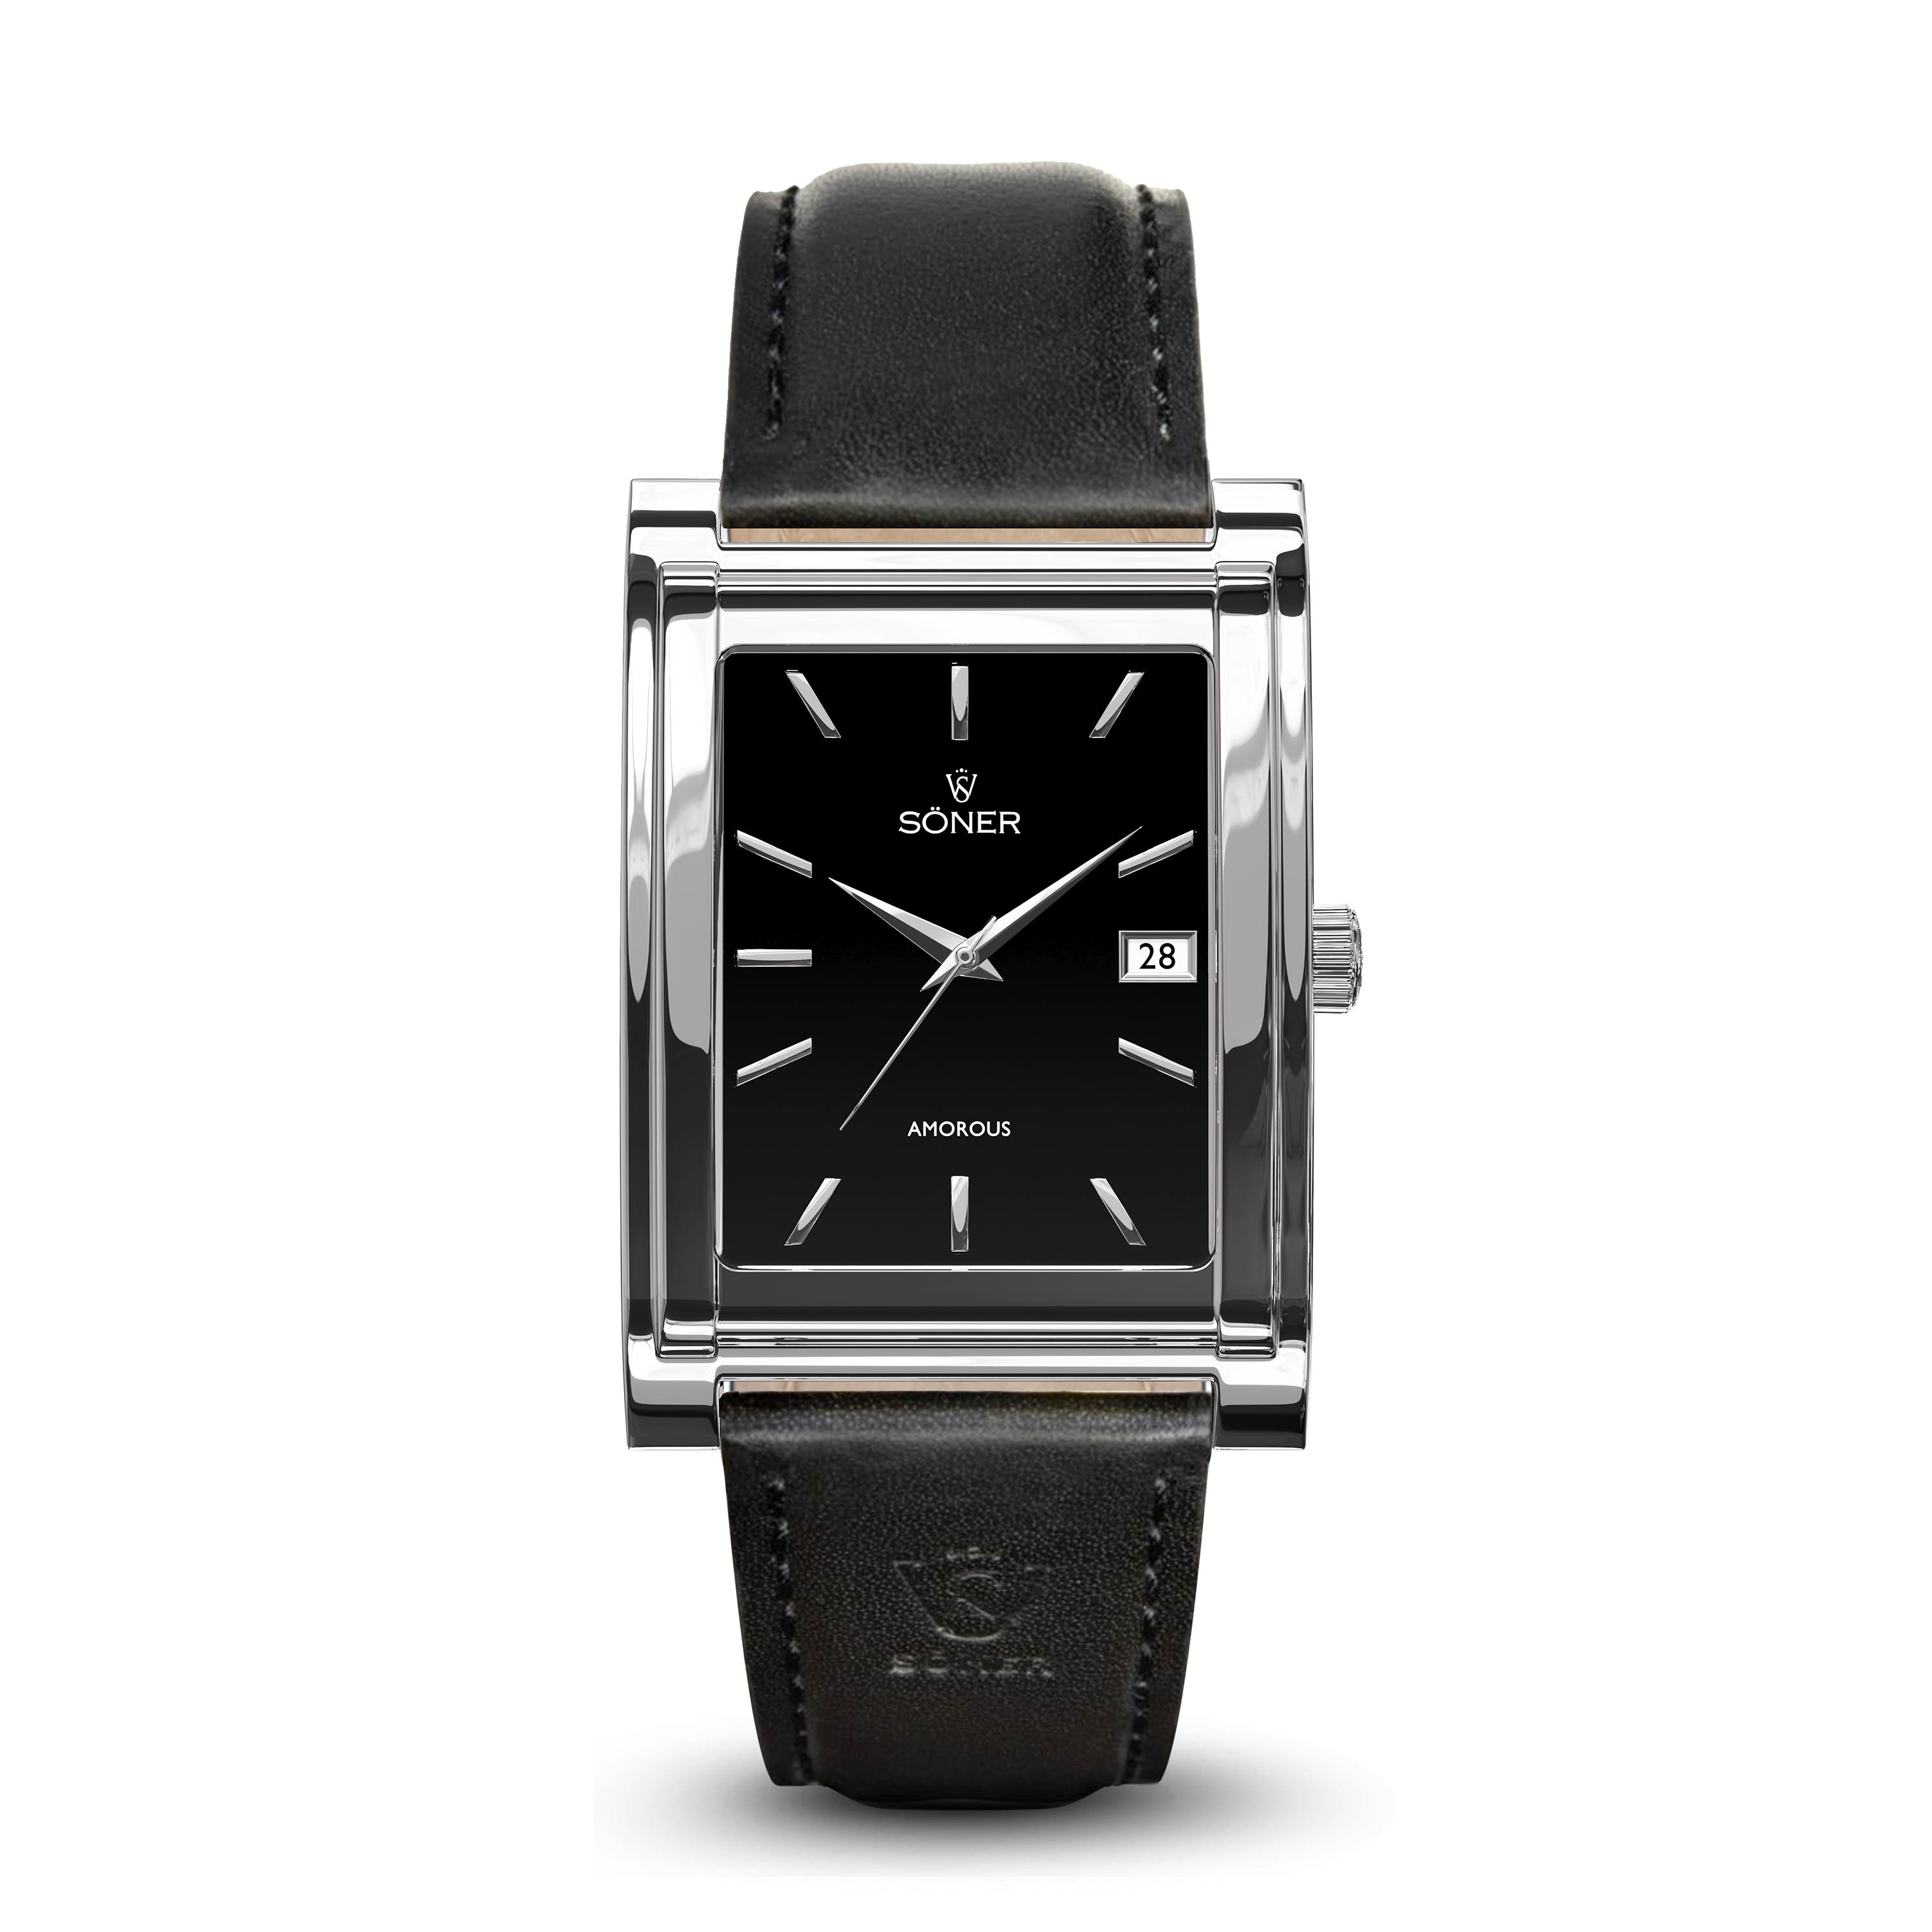 Square automatic watch, Amorous Barcelona with black dial - black leather strap front view